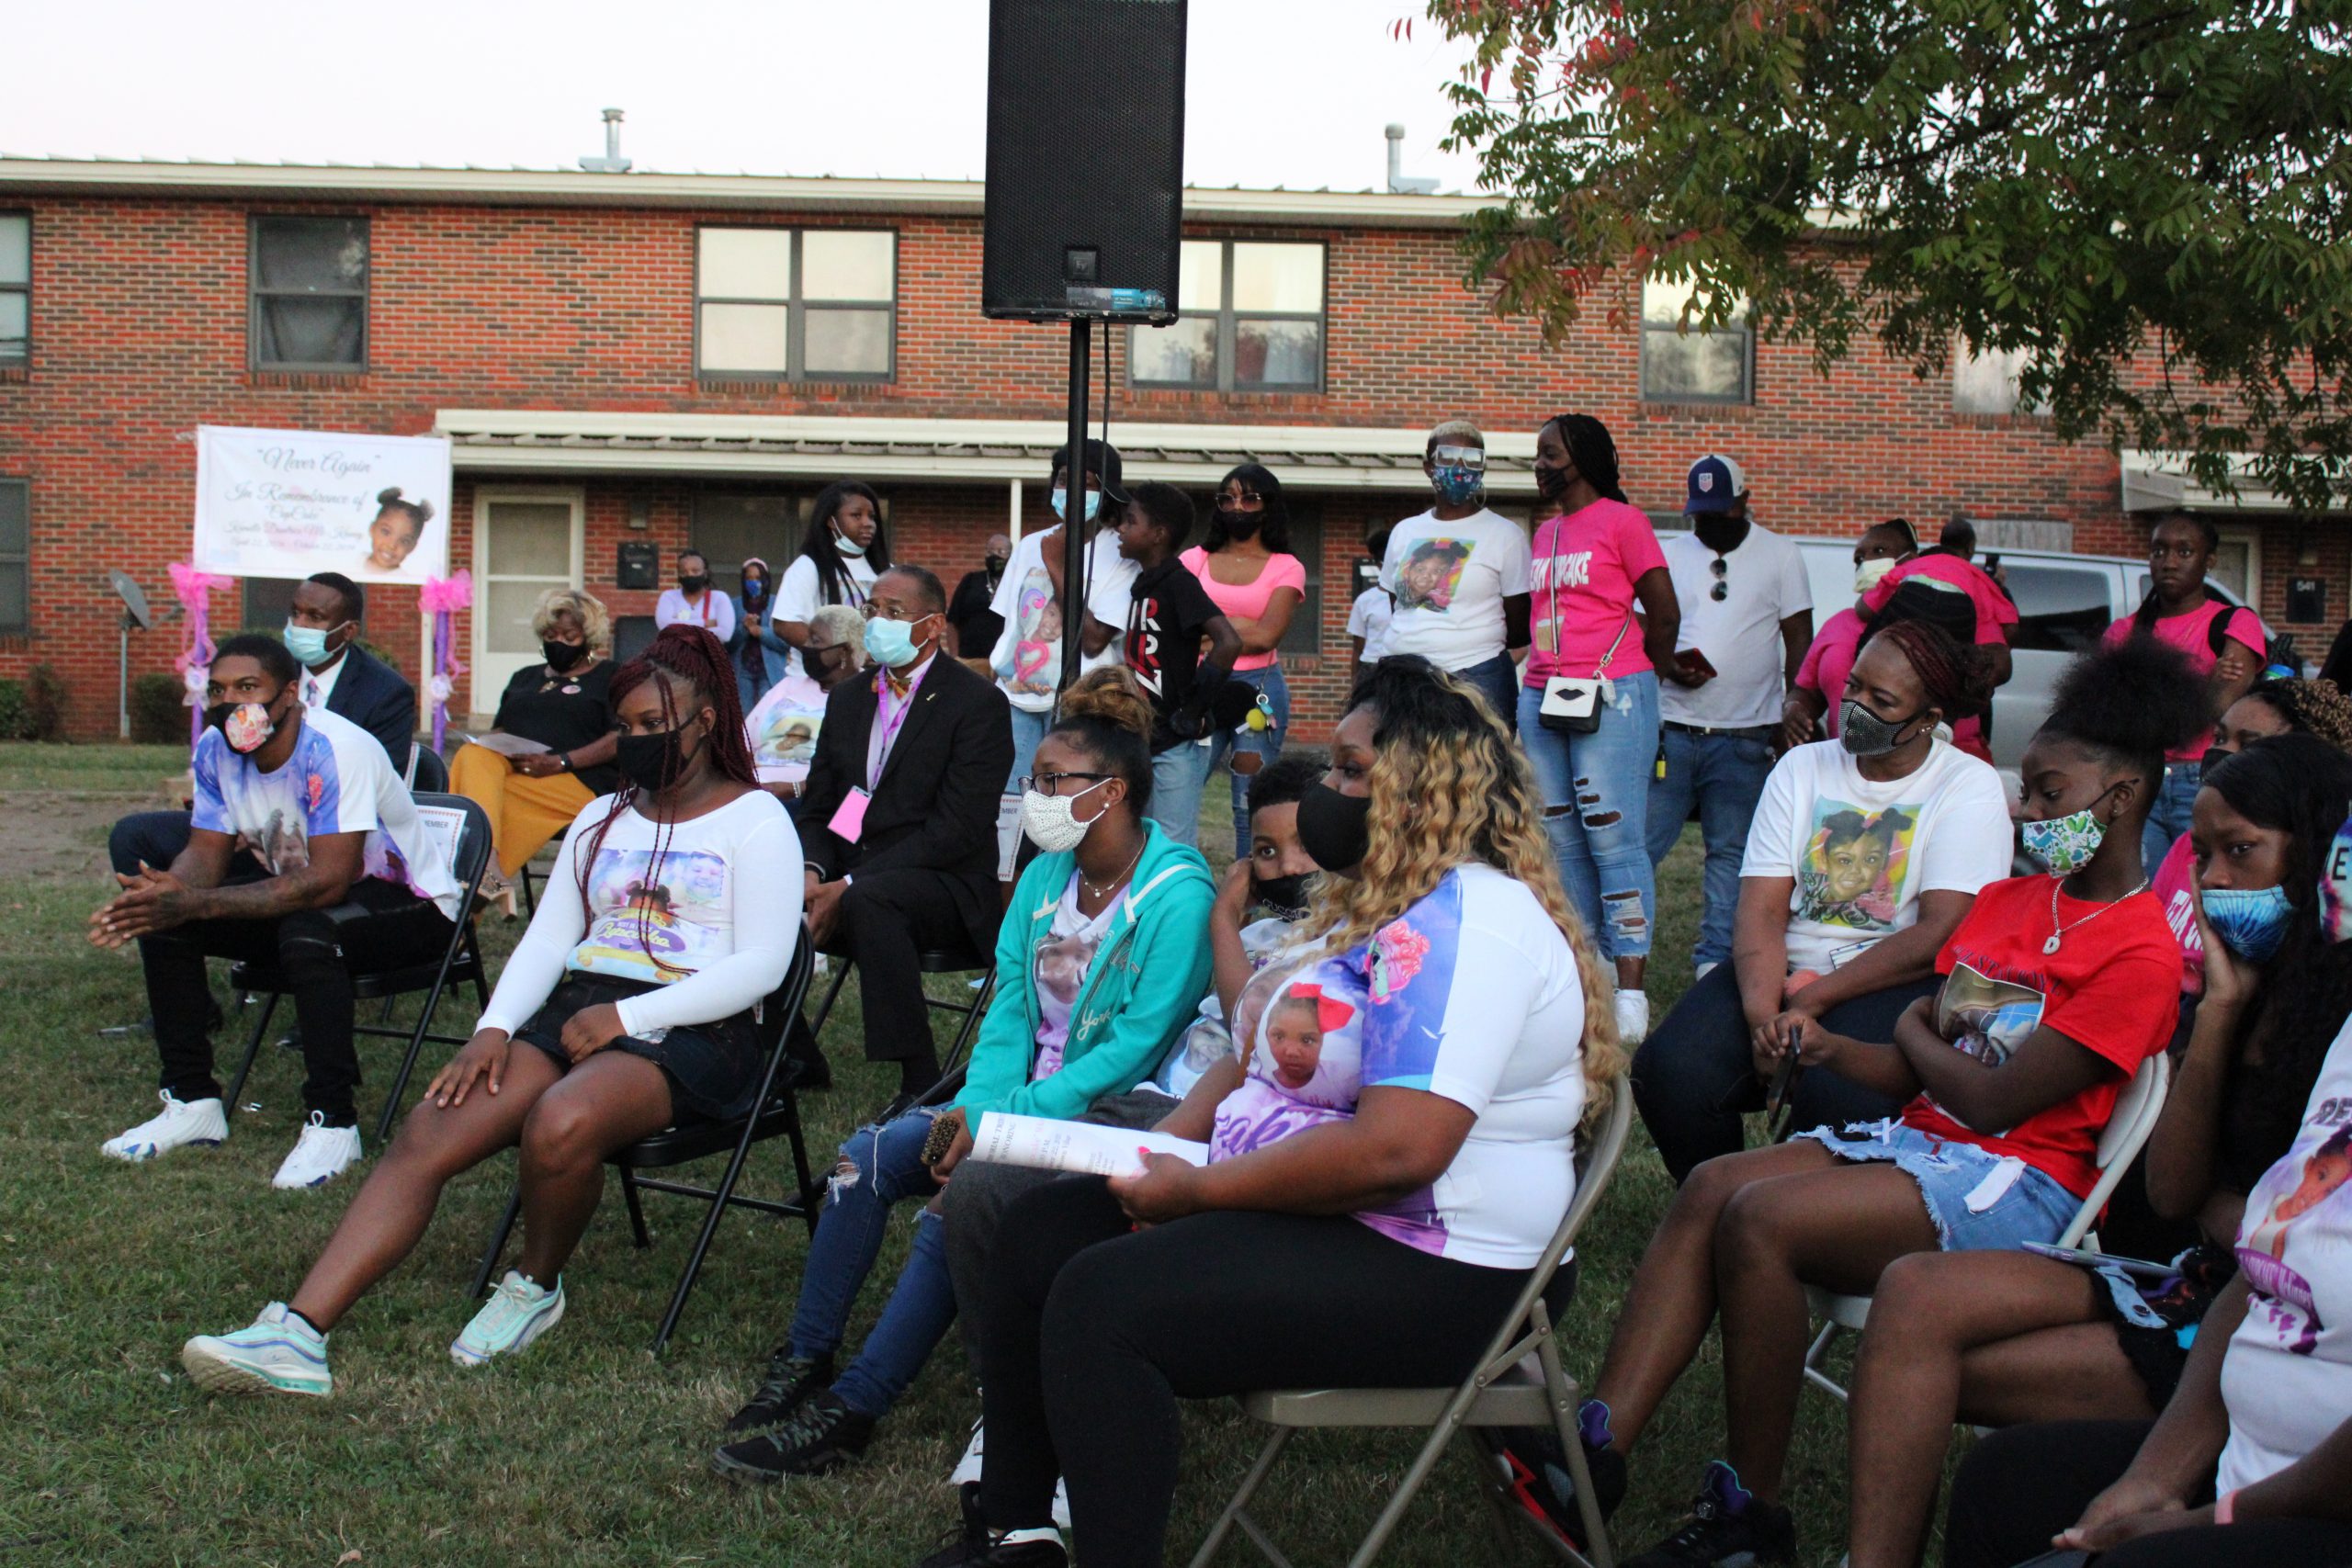 Family and friends of Kamille "Cupcake" McKinney listened during a service for the 3-year-old who was kidnapped a year ago. (Sydney Melson, for The Birmingham Times) 